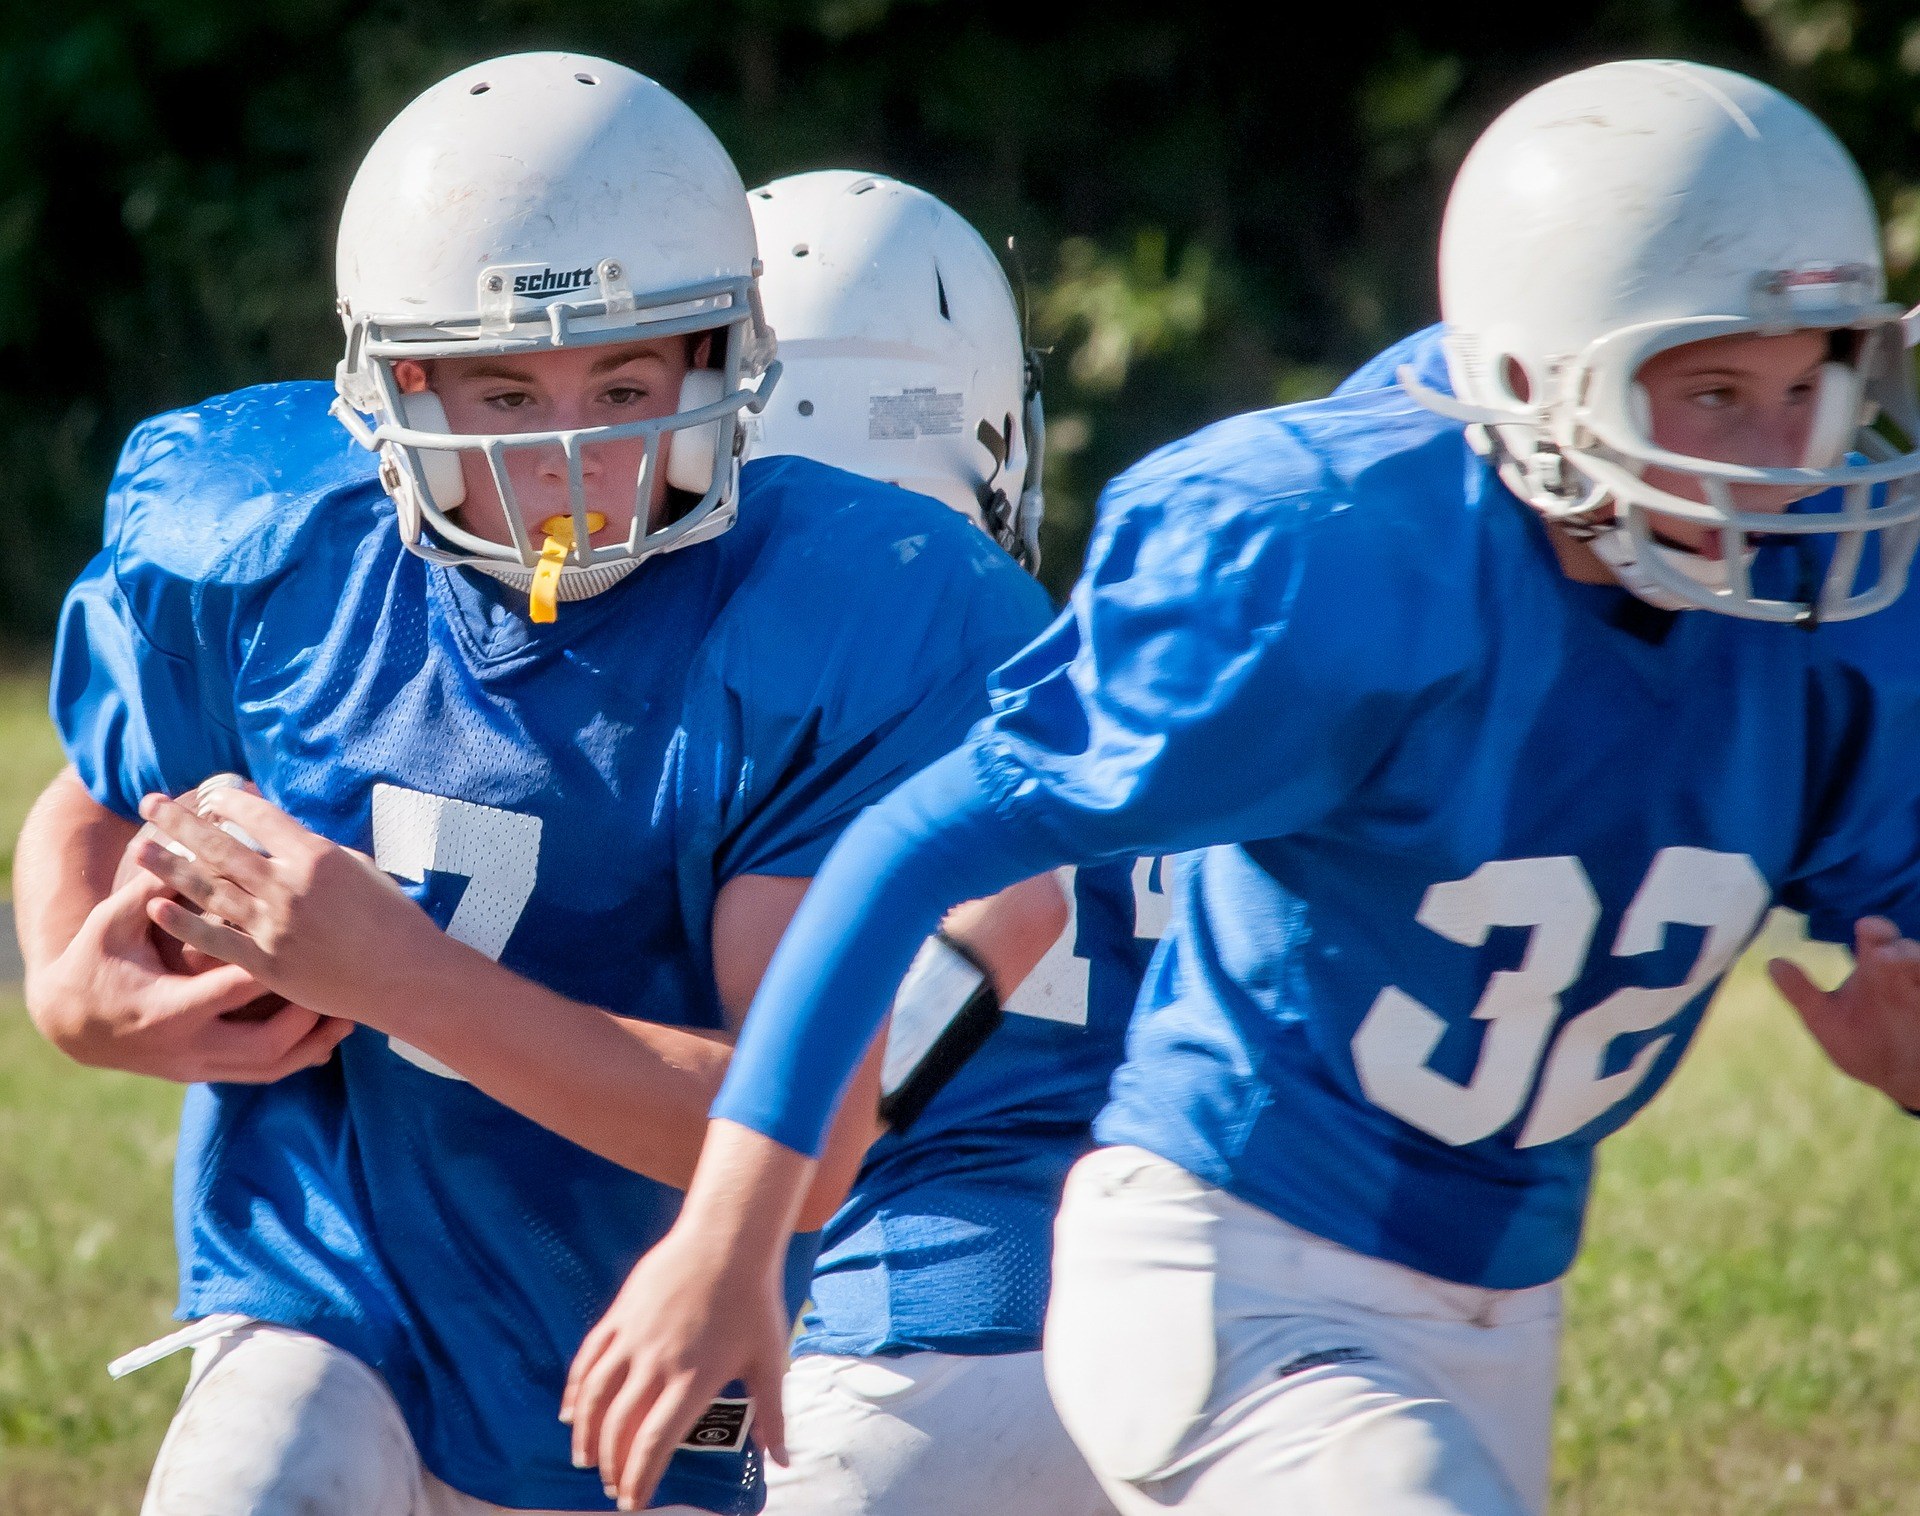 why people with braces should wear mouth guards to sports